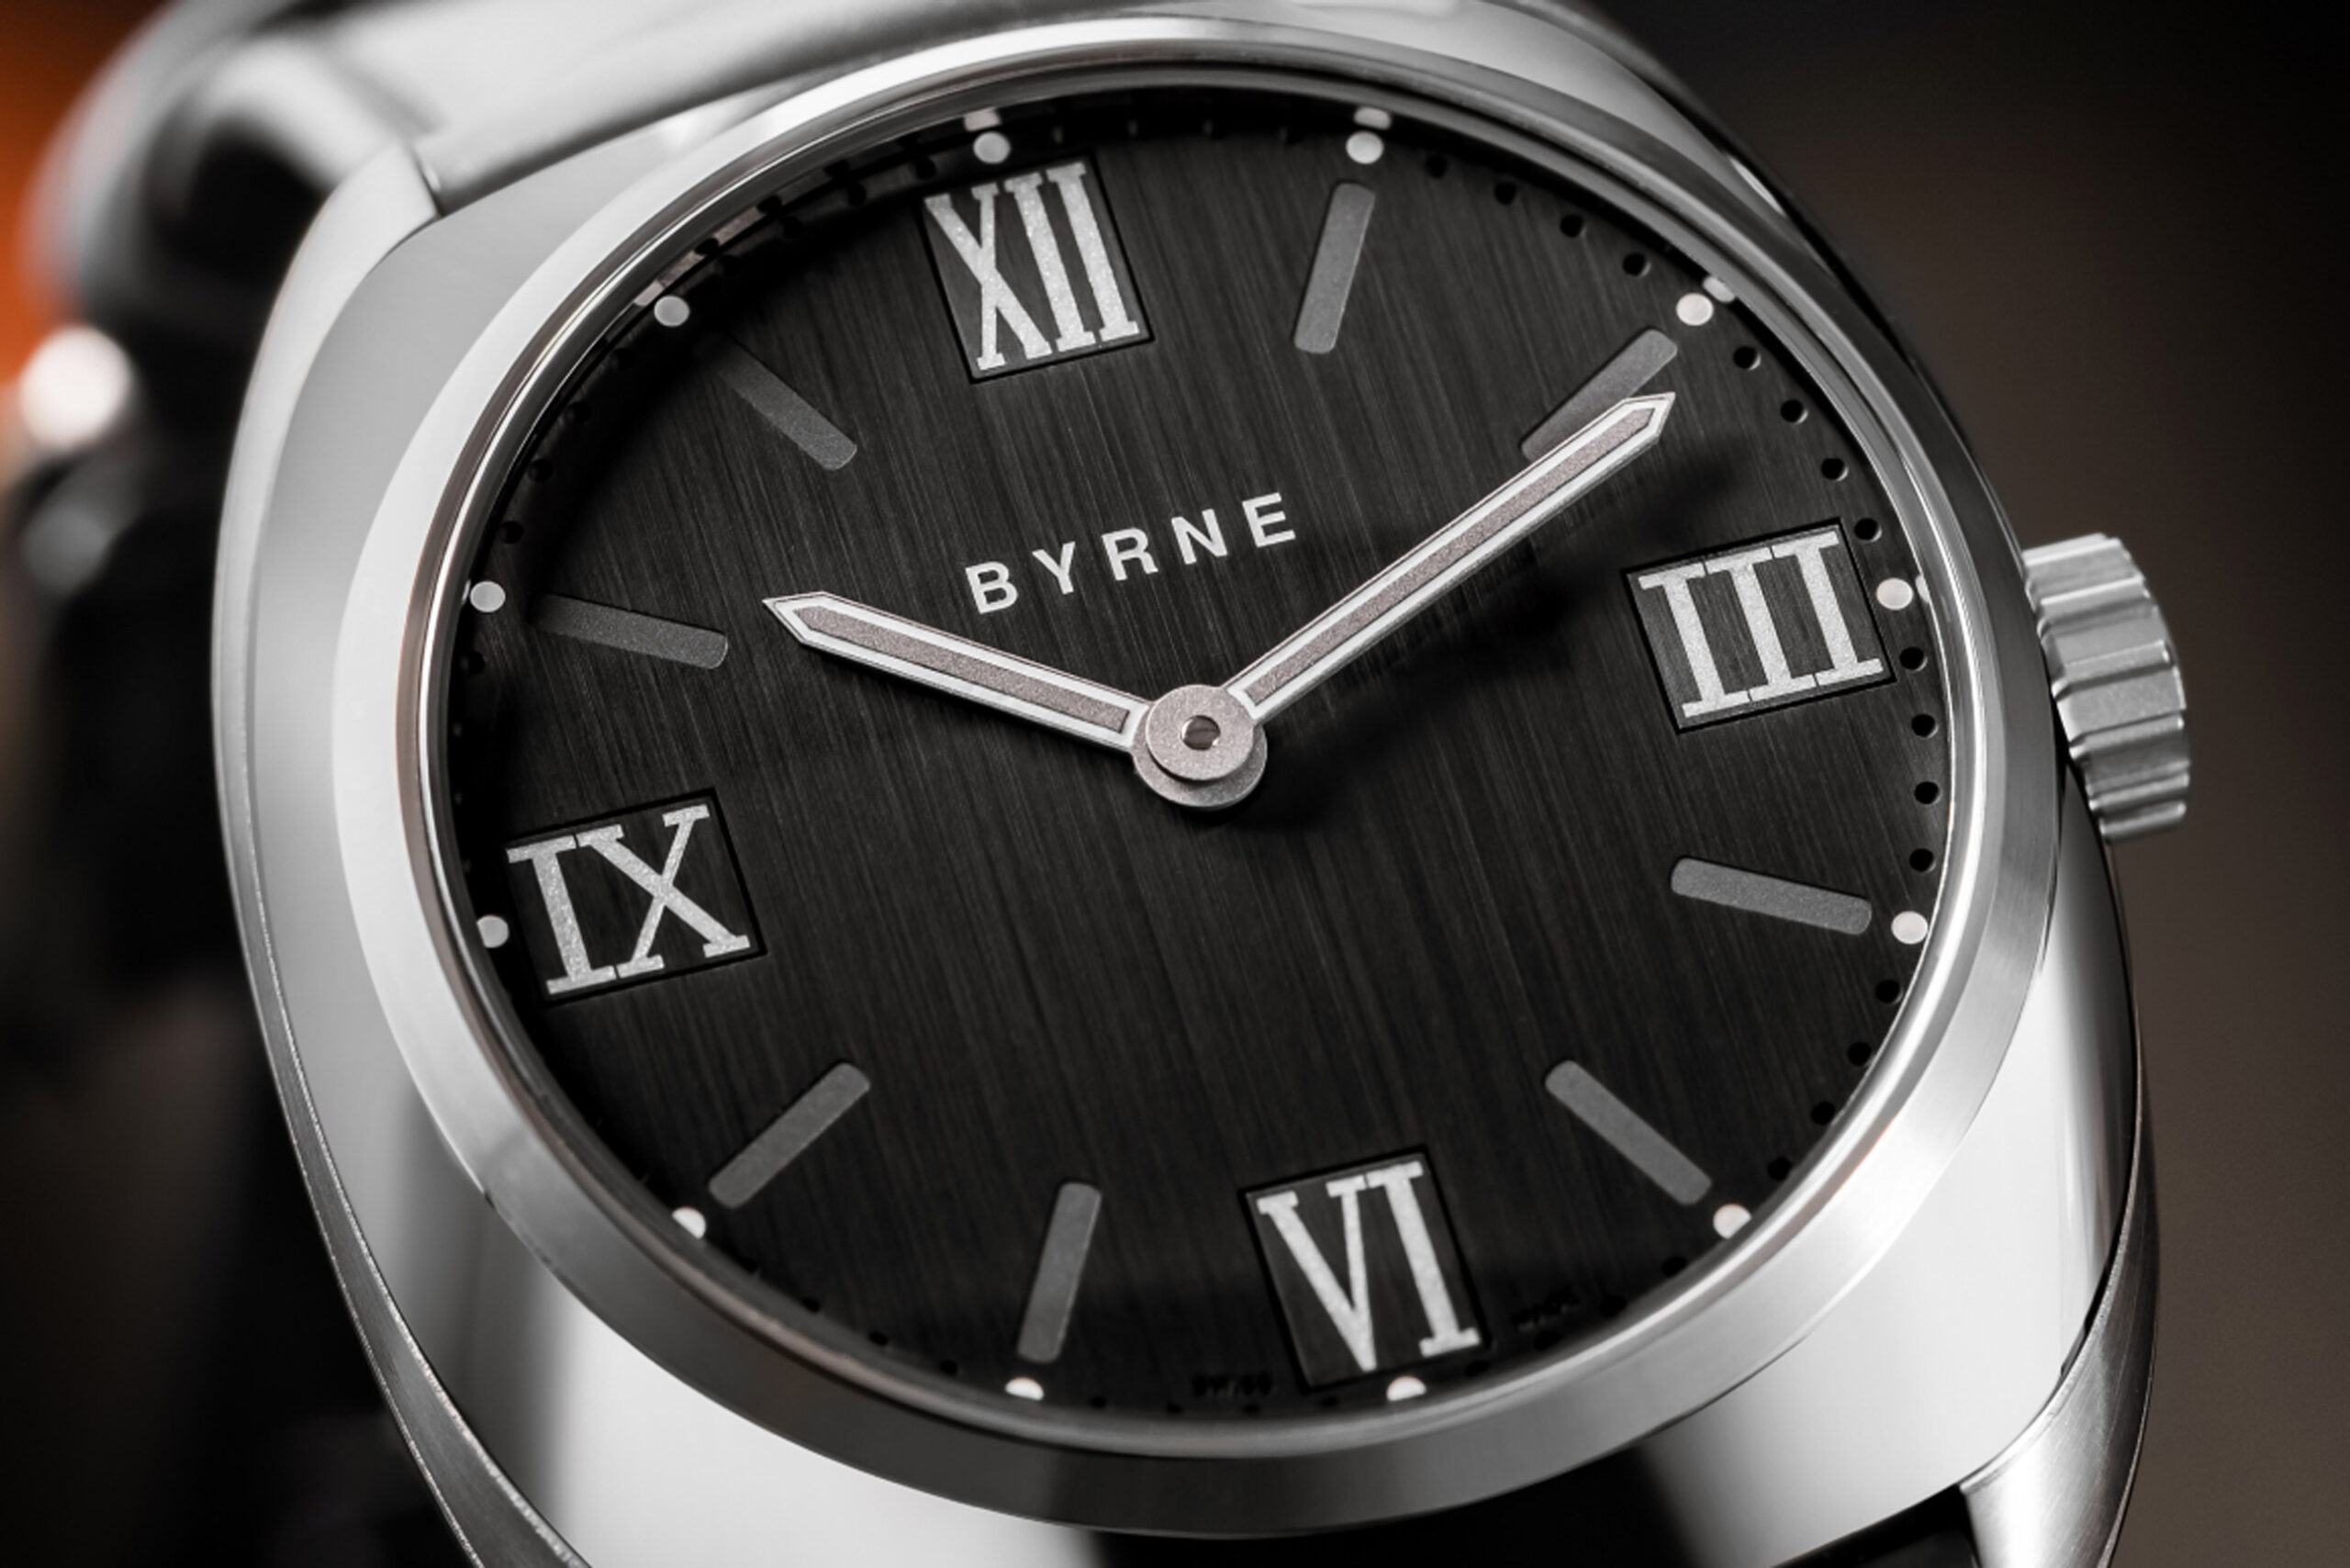 Byrne Gyro Dial Black Number 8 close up of dial.